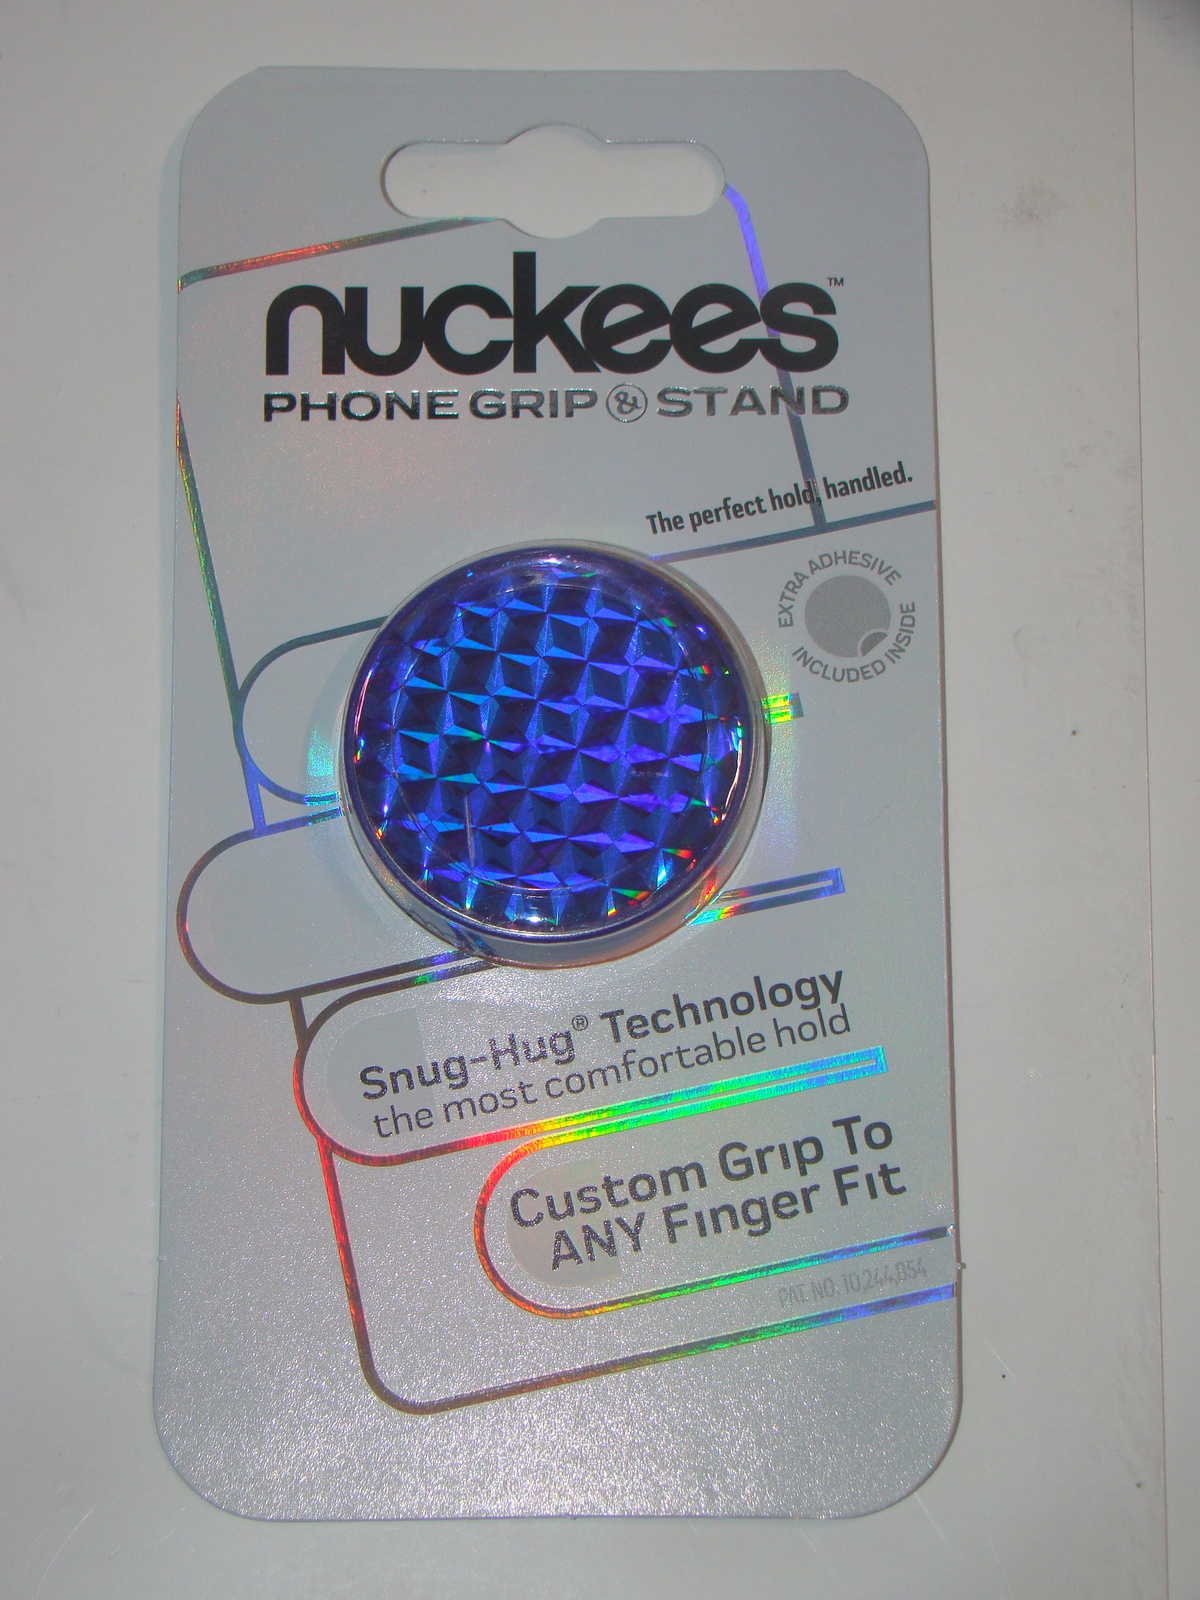 Primary image for nuckees - PHONE GRIP & STAND - (Blue/Purple) (New)